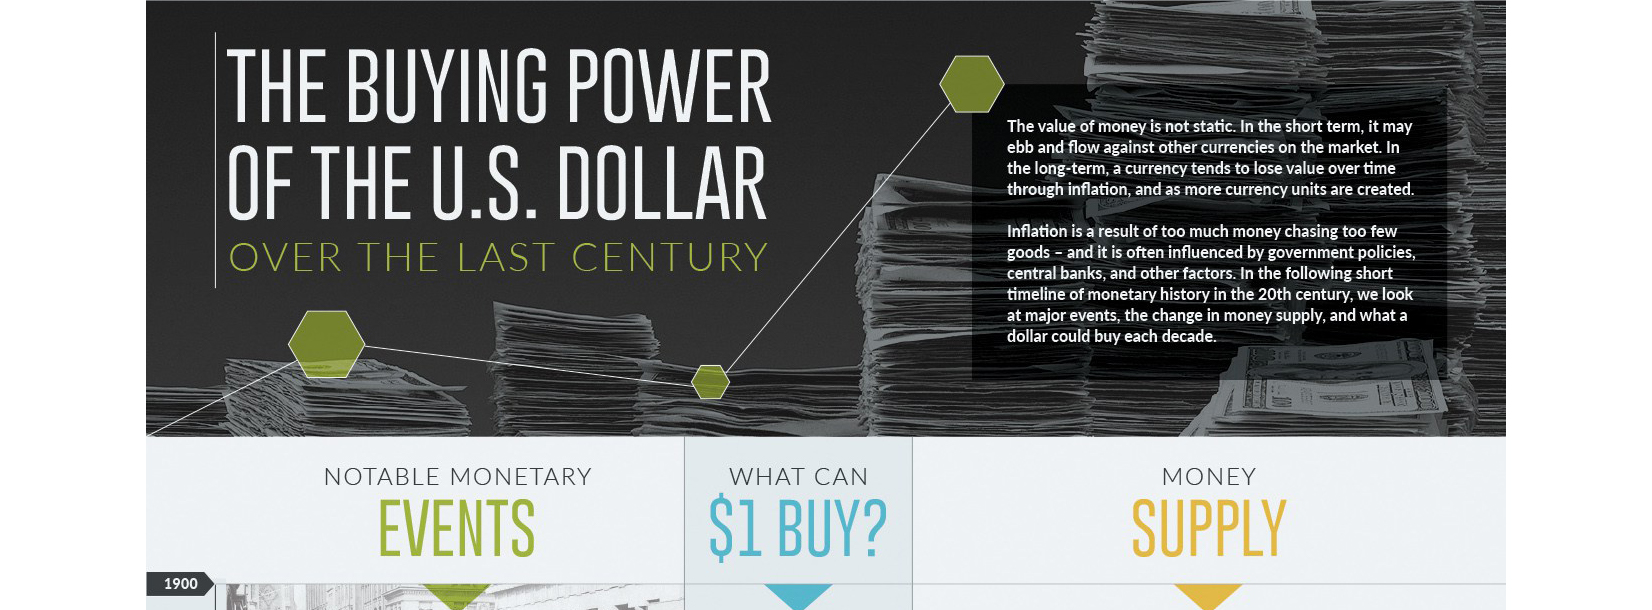 The Buying Power of the U.S. Dollar Over the Last Century